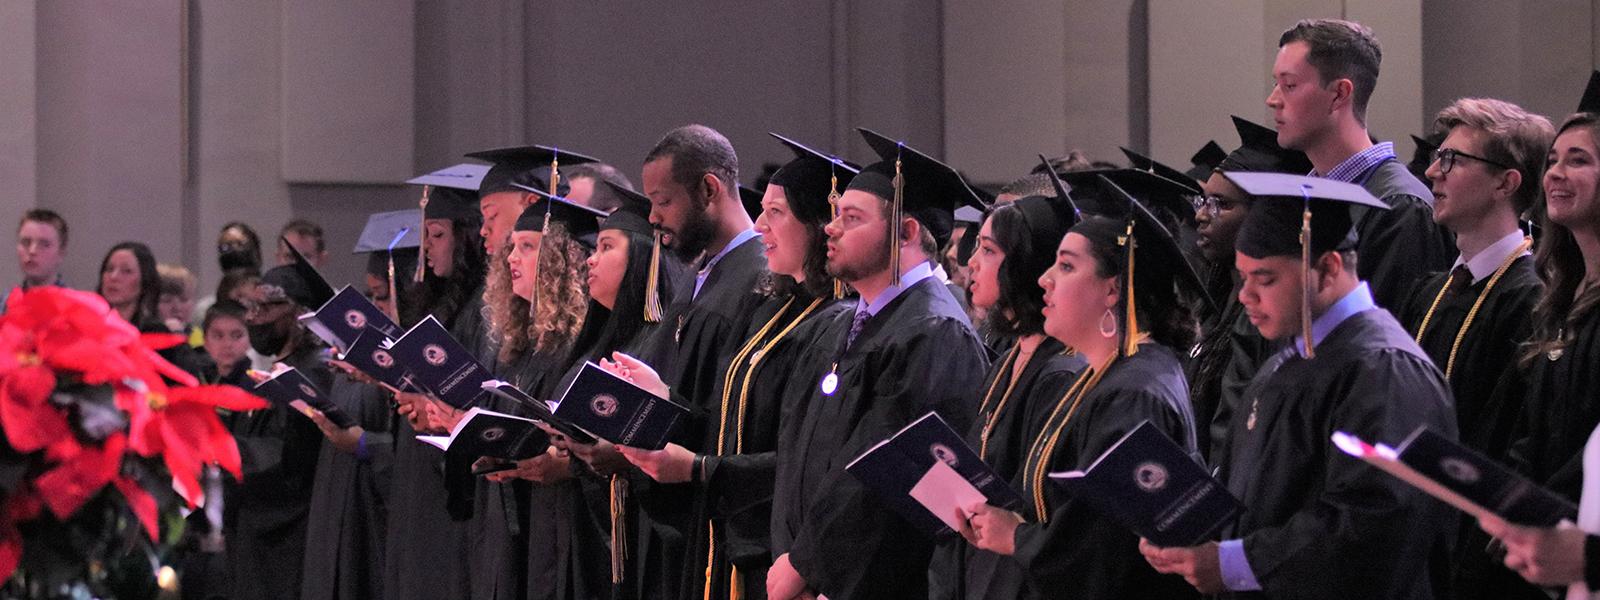 Graduates sing Christmas carols at the December commencement.